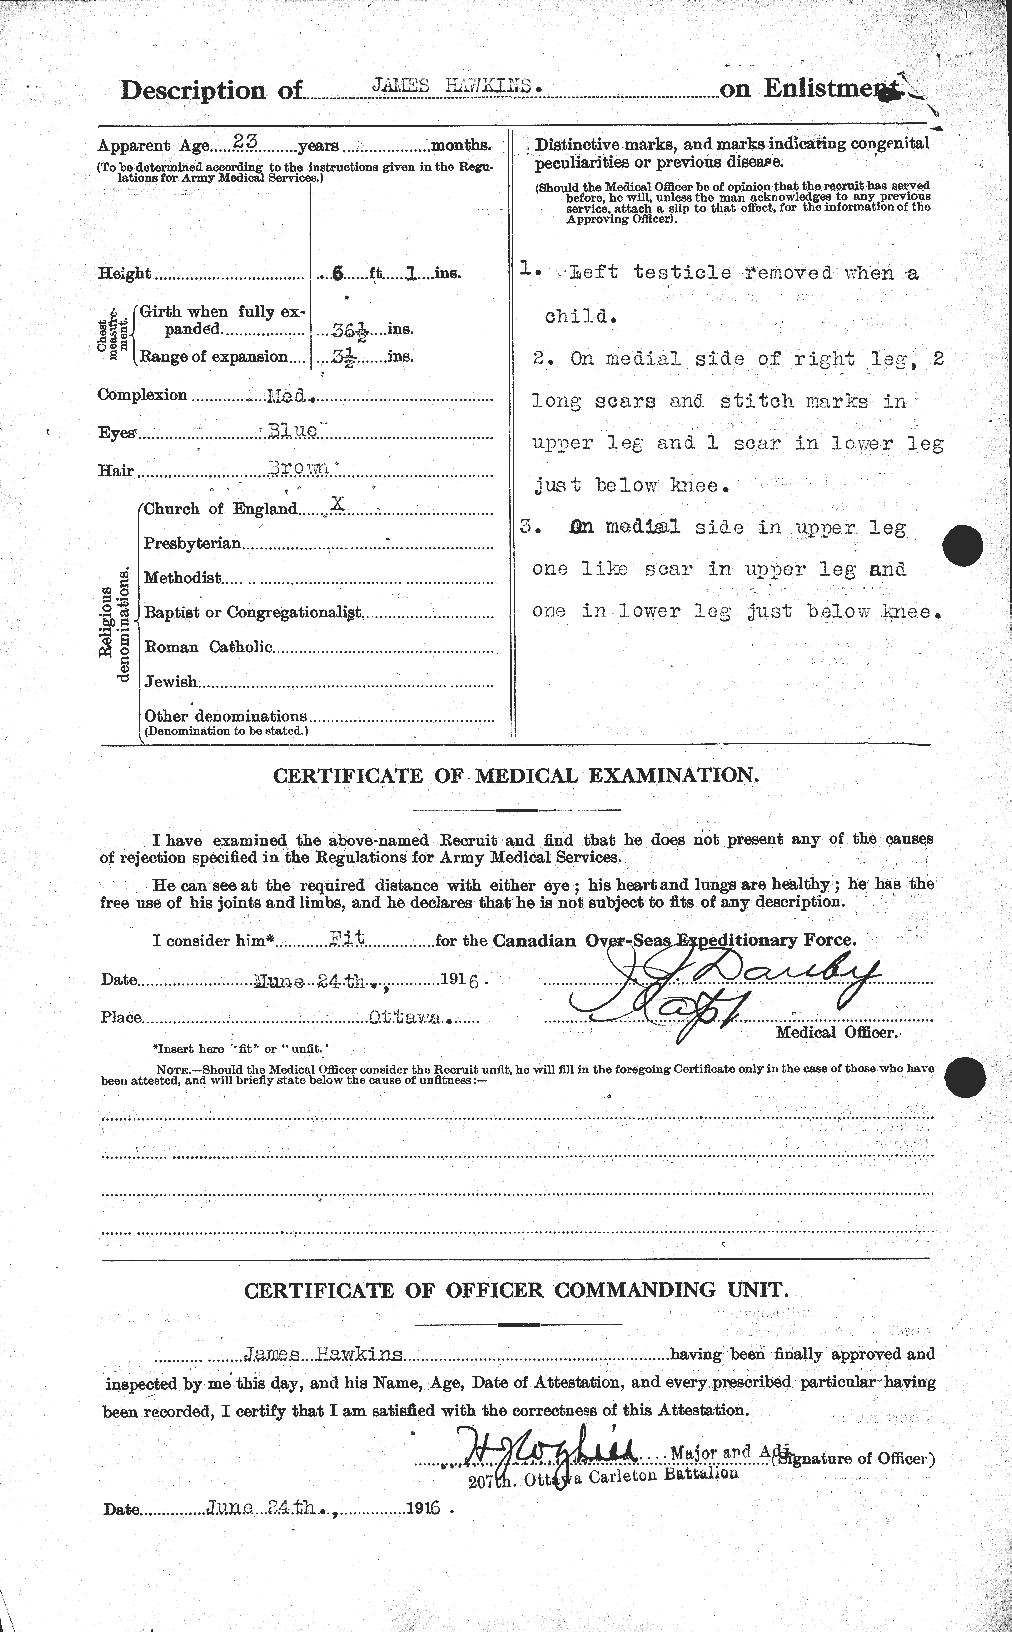 Personnel Records of the First World War - CEF 387166b